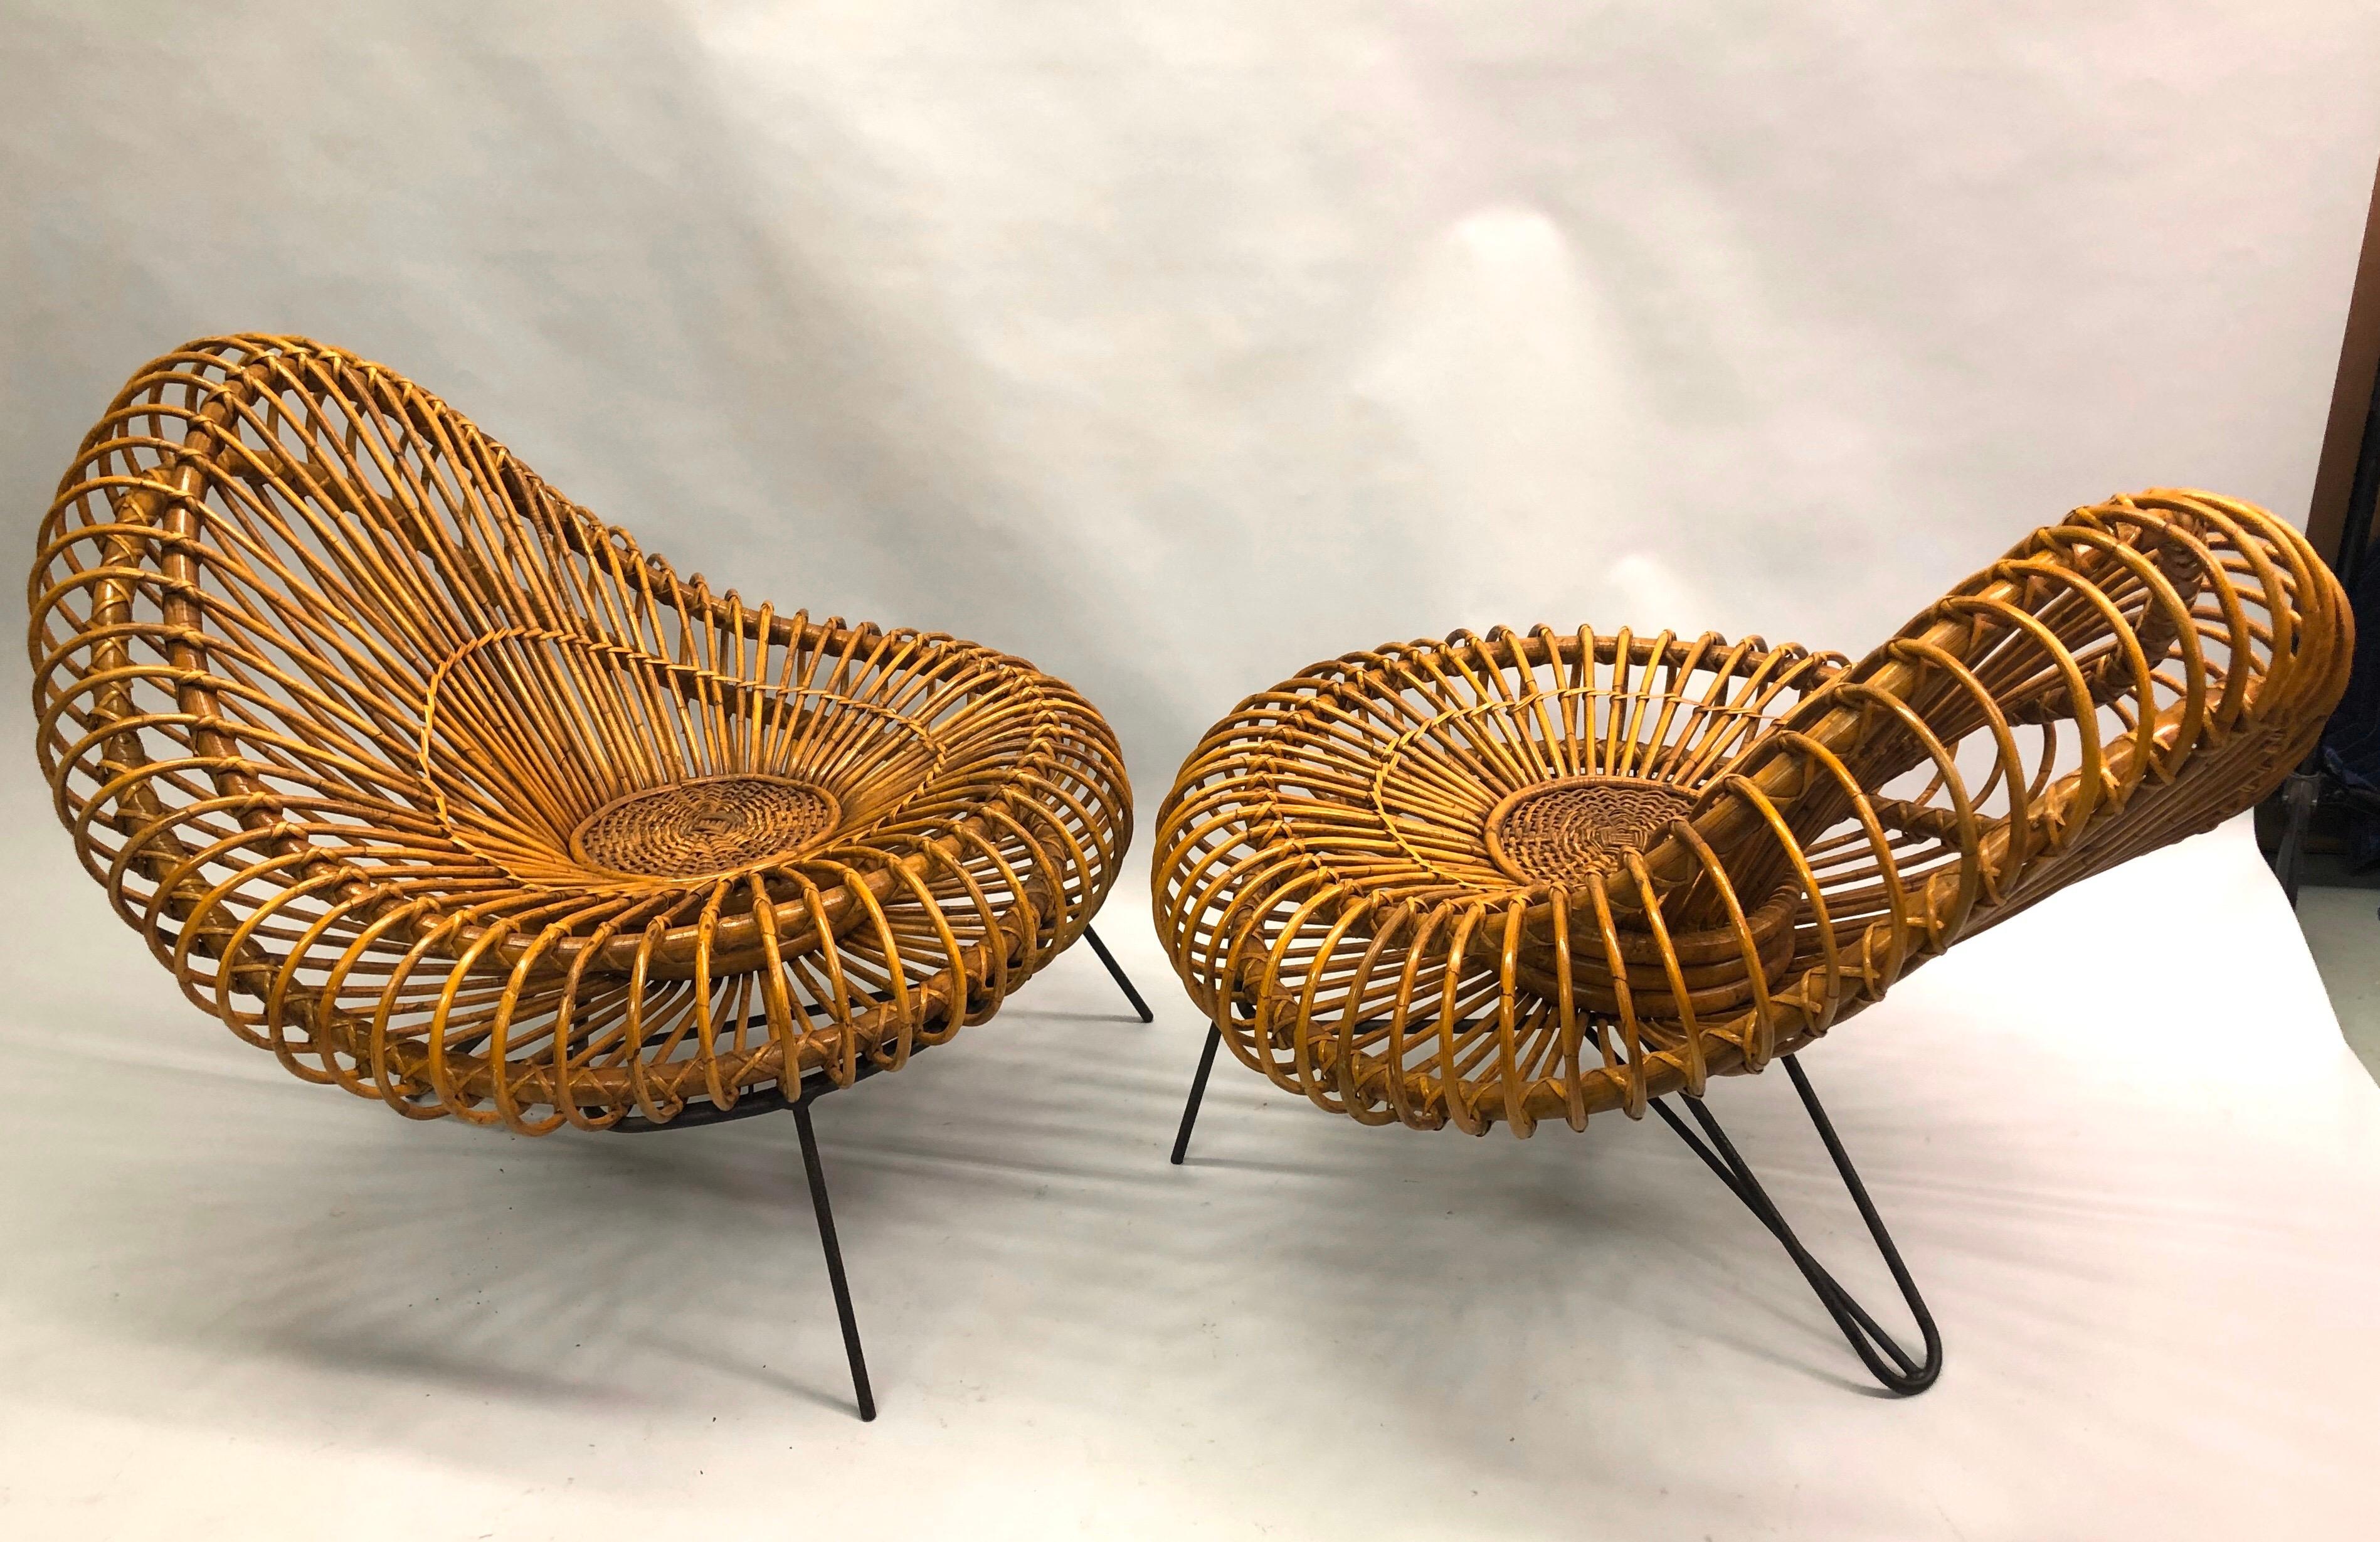 Enameled Pair of French Mid-century Rattan Lounge Chairs by Janine Abraham & Dirk Jan Roi